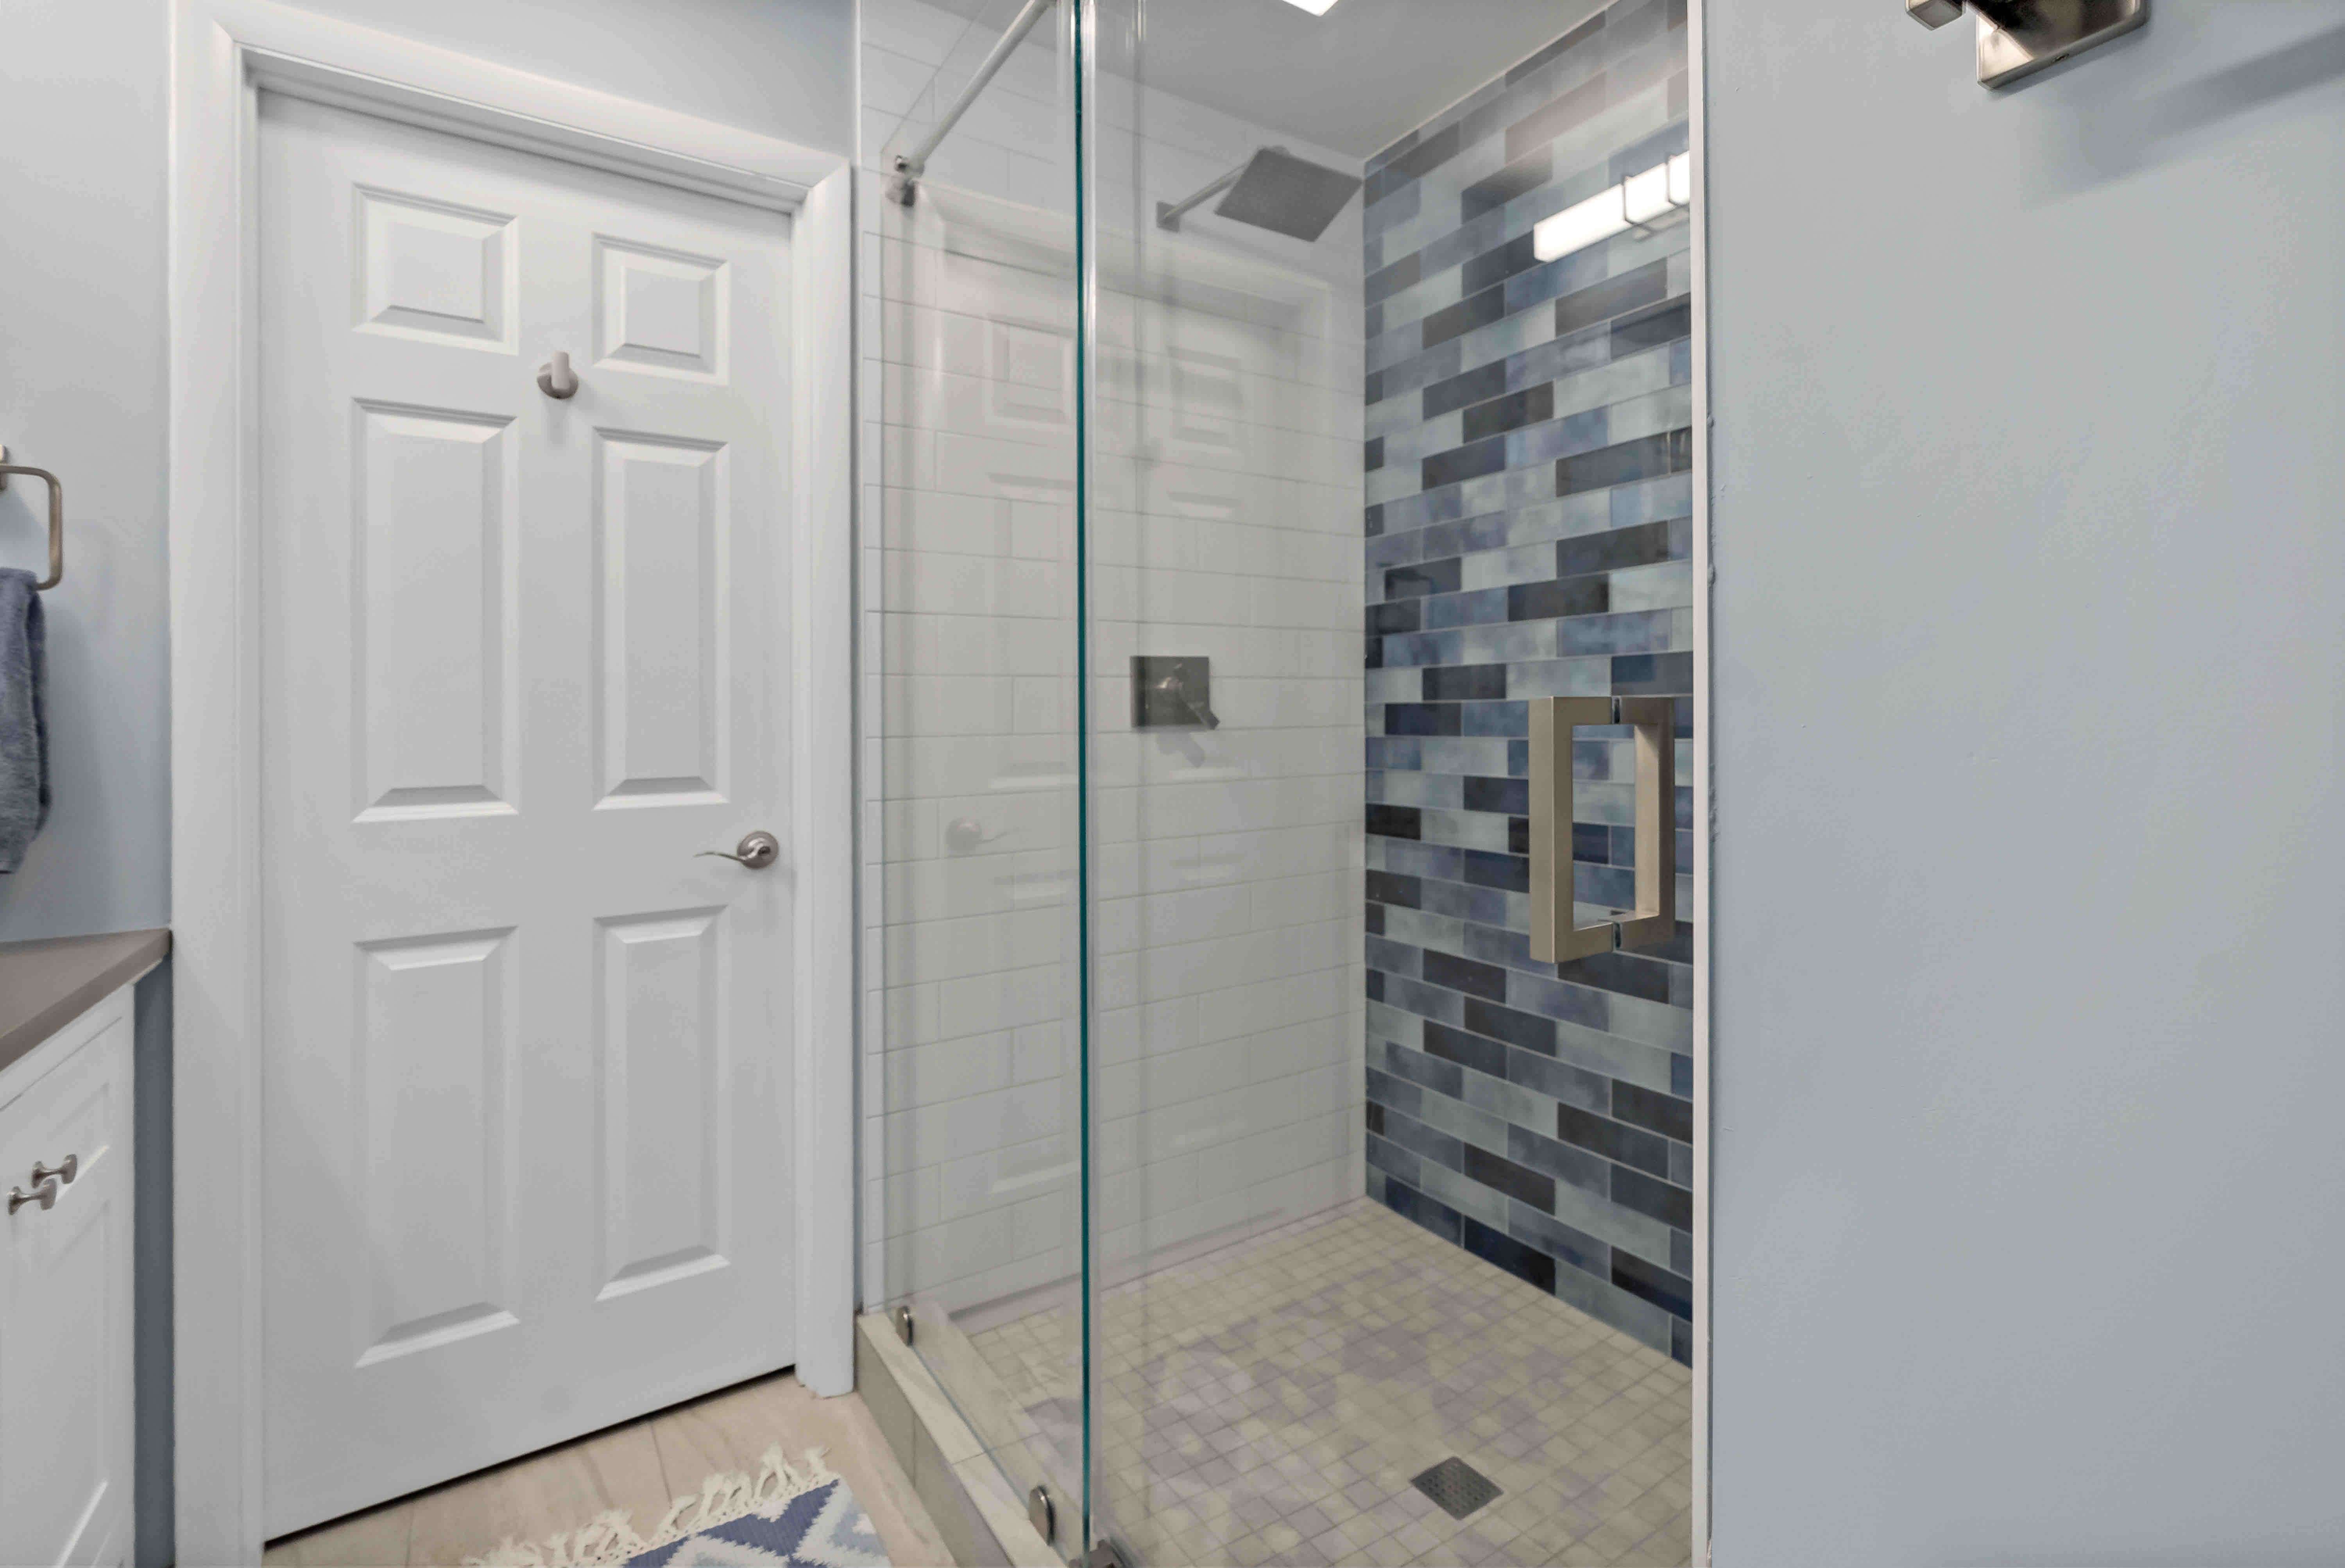 Stand up shower with glass walls and door